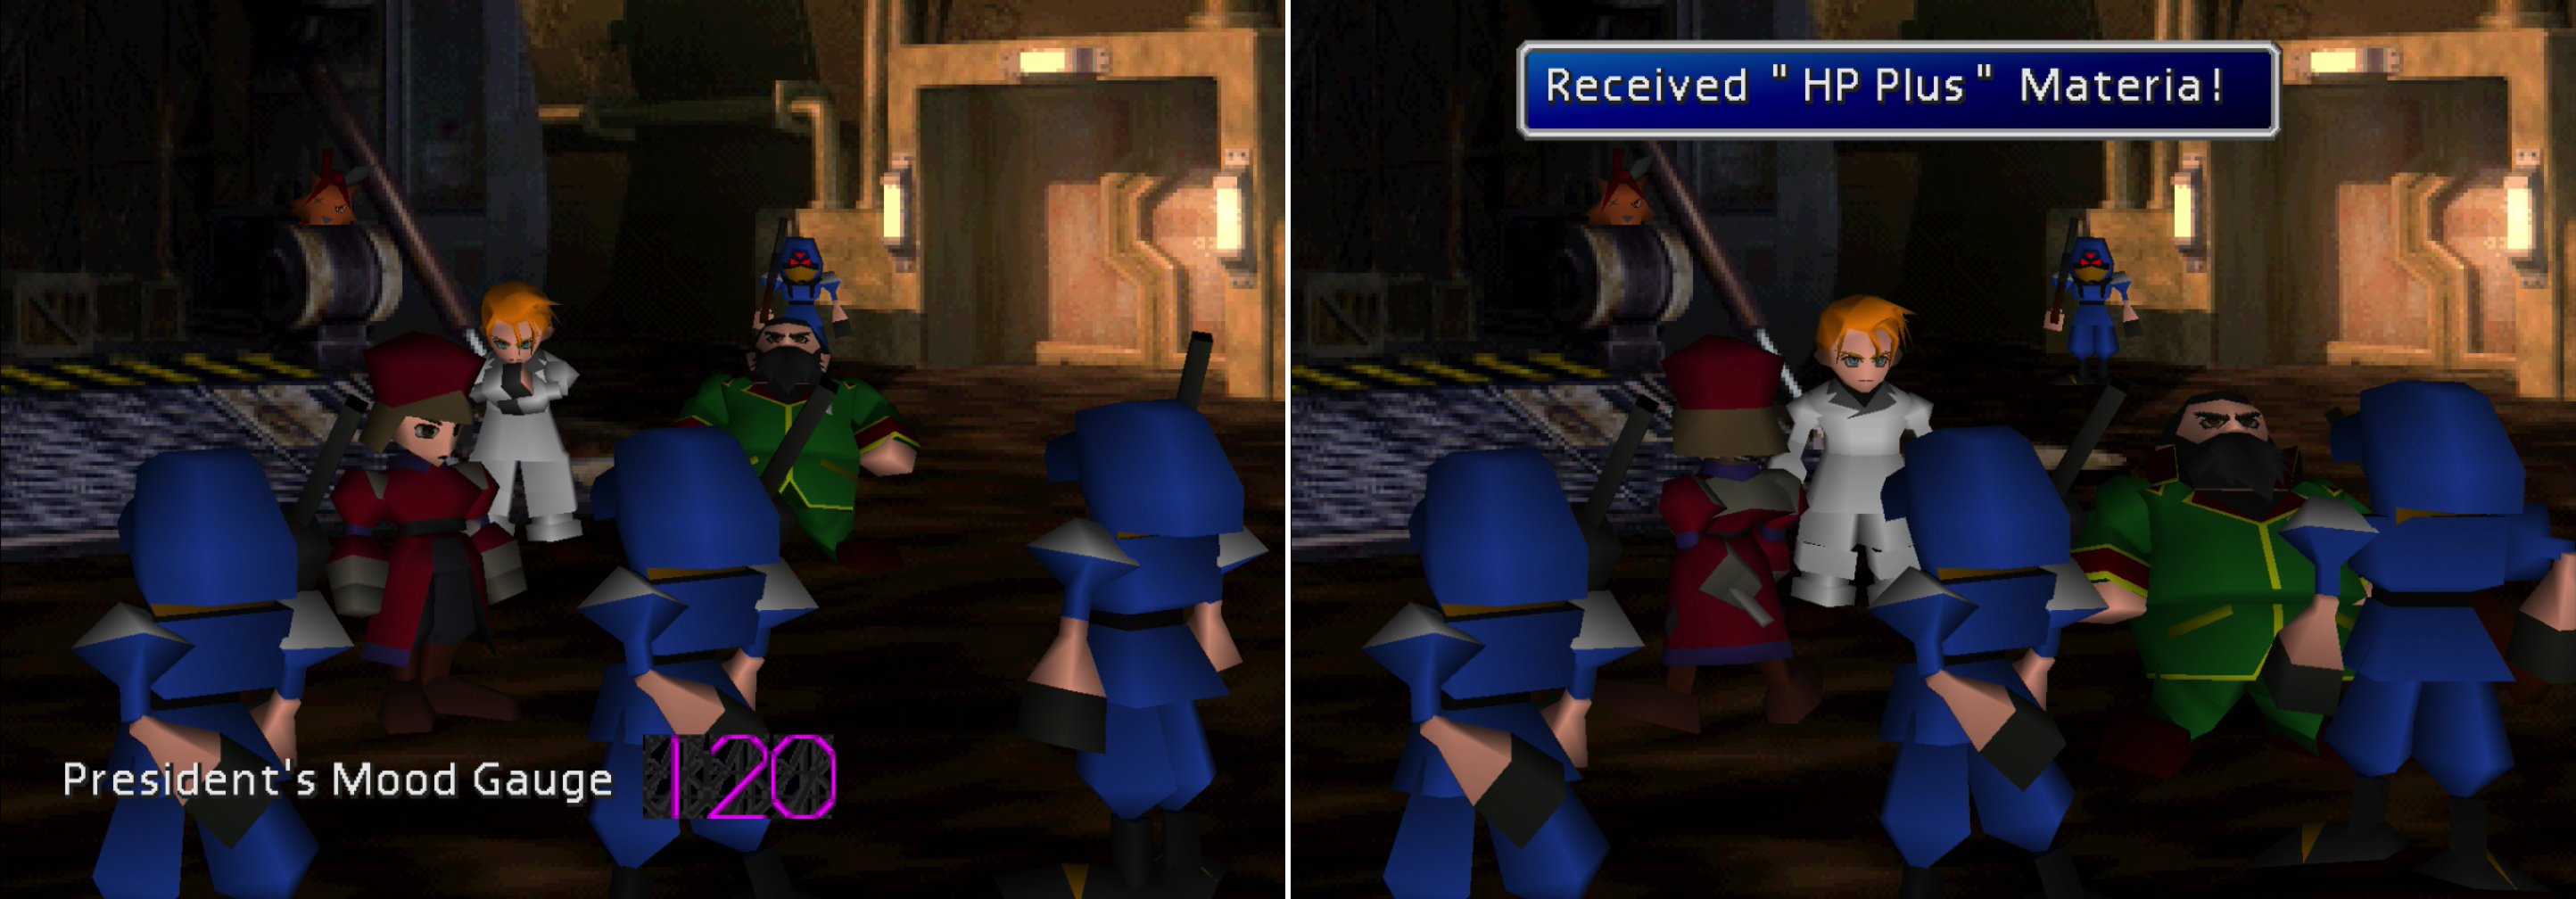 Impress Rufus by performing the right moves (left), or just do well enough to get the HP Plus Materia (right).